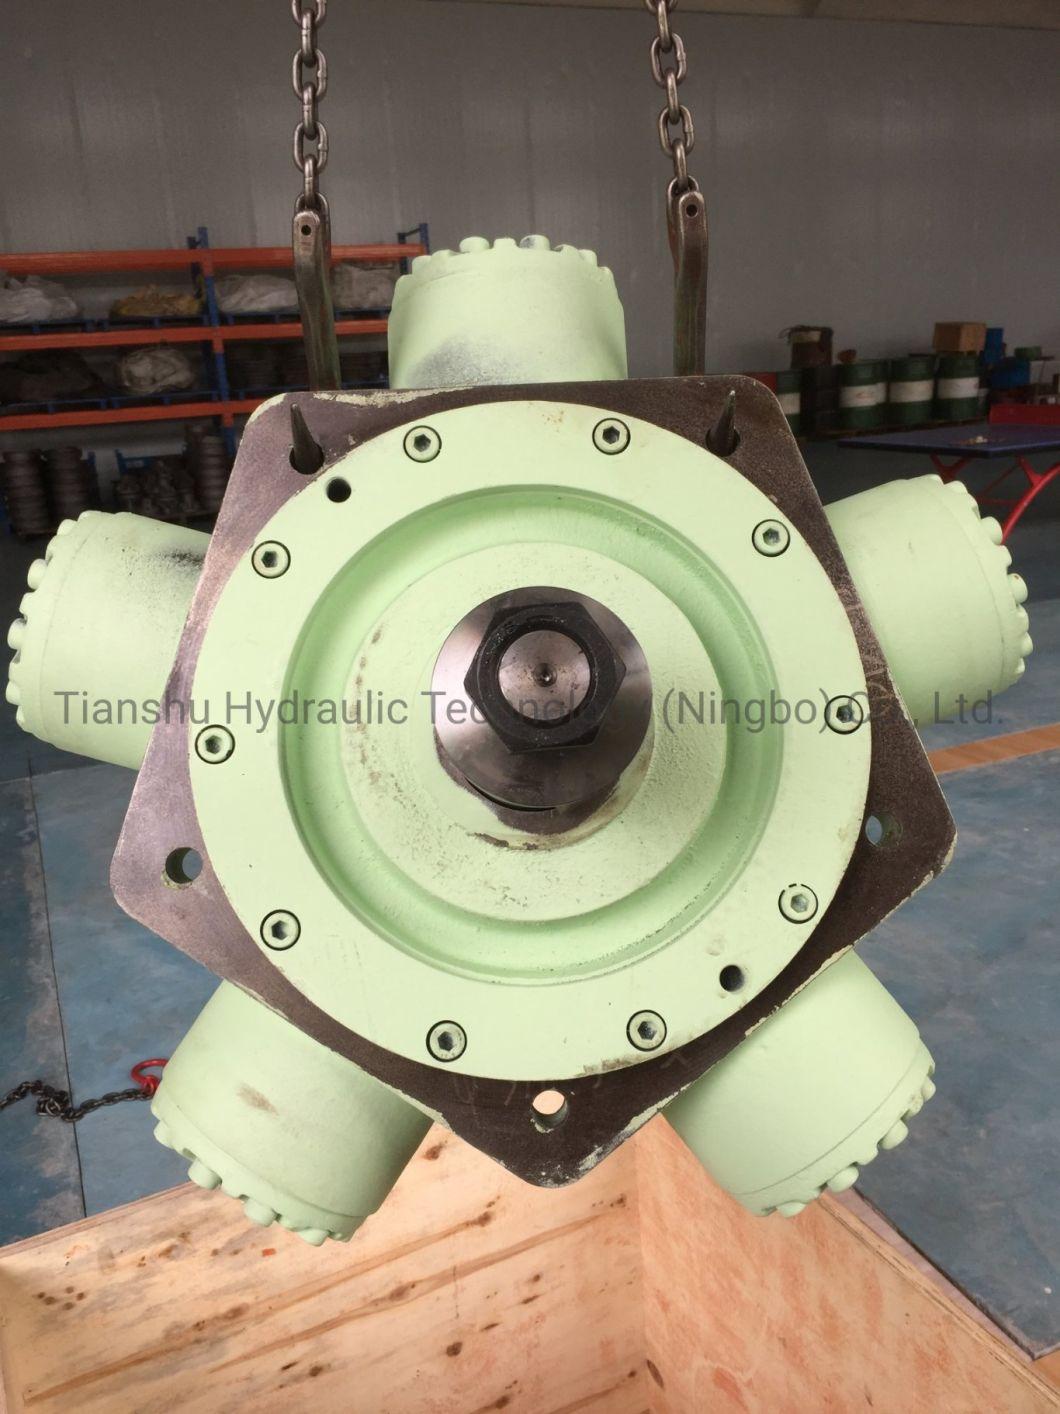 Kayaba Kyb Staffa Low Speed Large Torque Mrh 750 Mrh2 750 Hydraulic Oil Motor for Ship Anchor, Winch, Injection Moulding Machine.